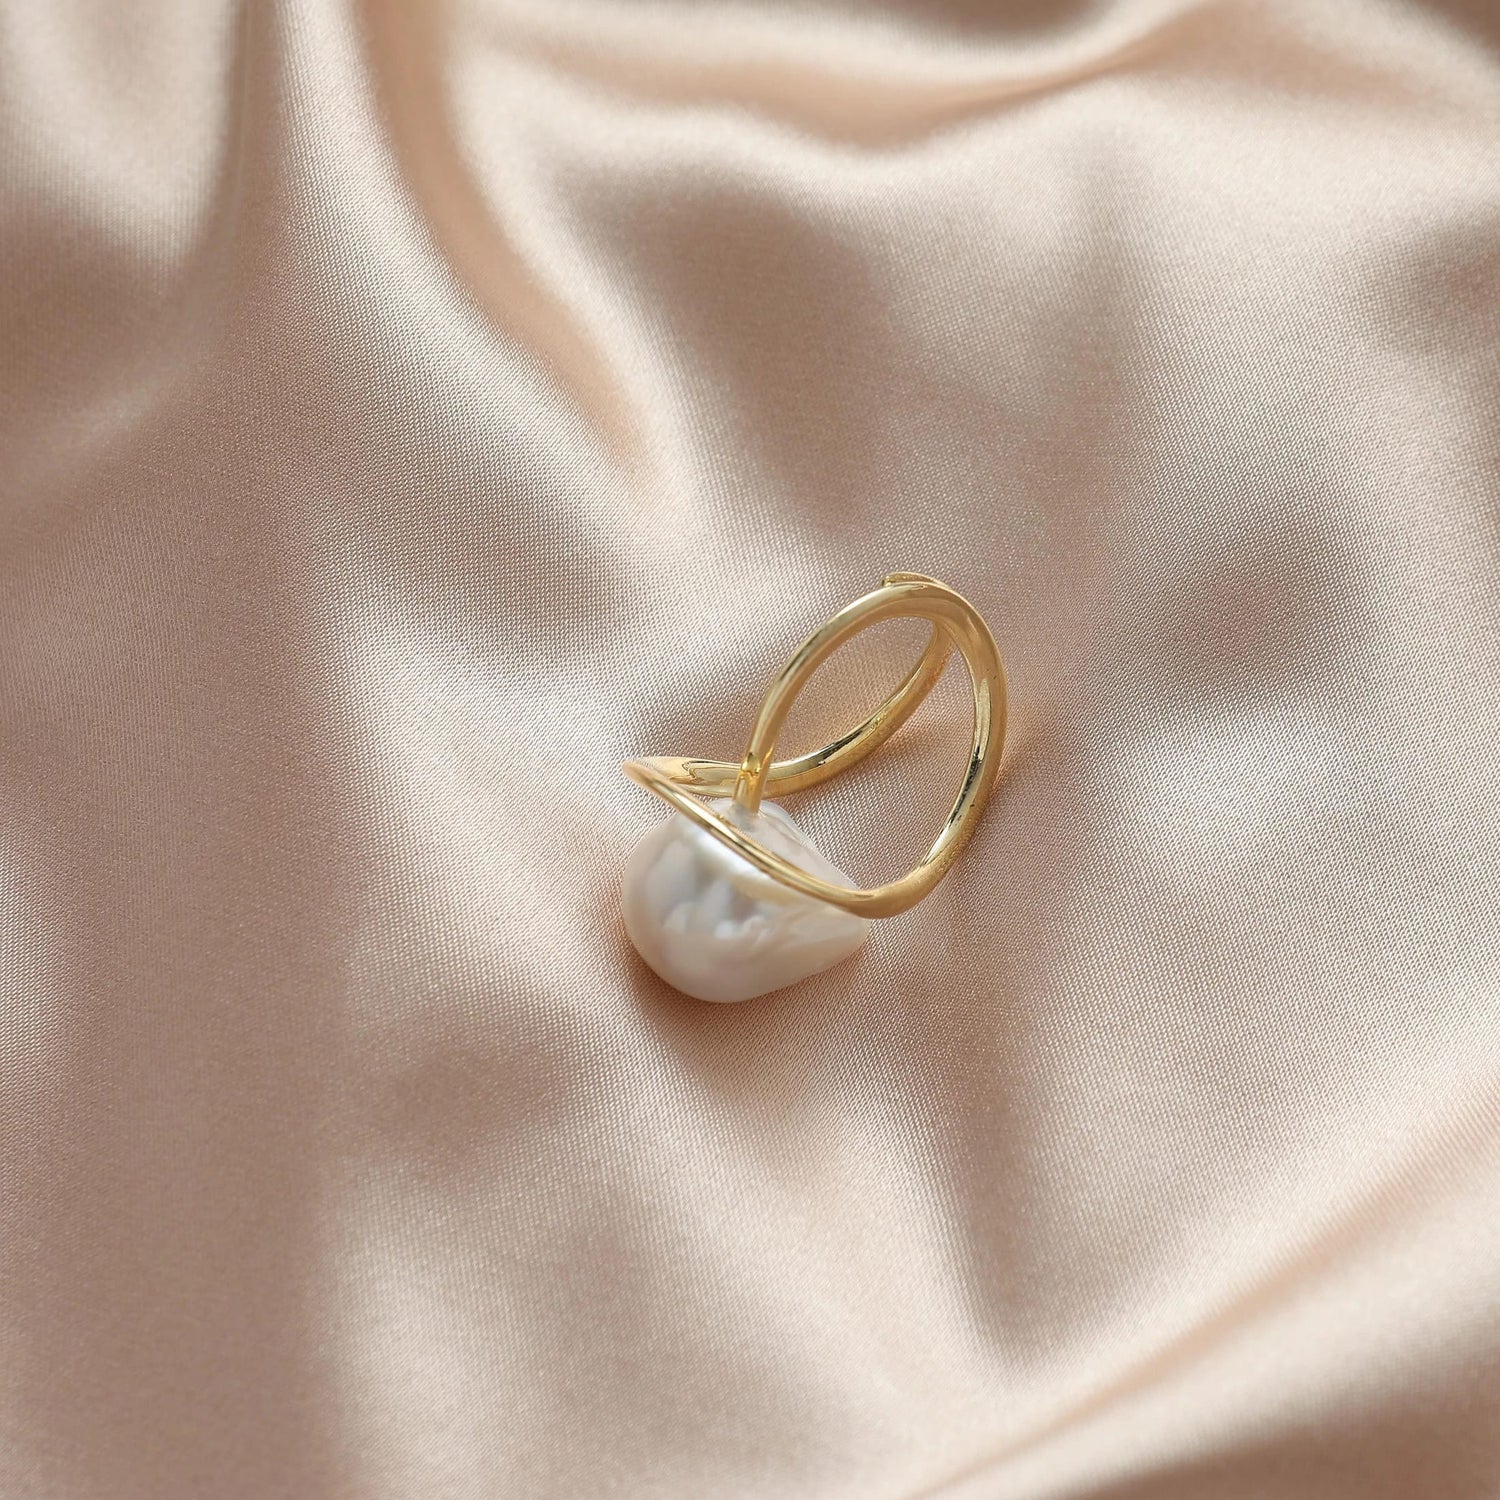 https://pearlvenus.com/products/antique-baroque-pearl-ring-in-sterling-silver